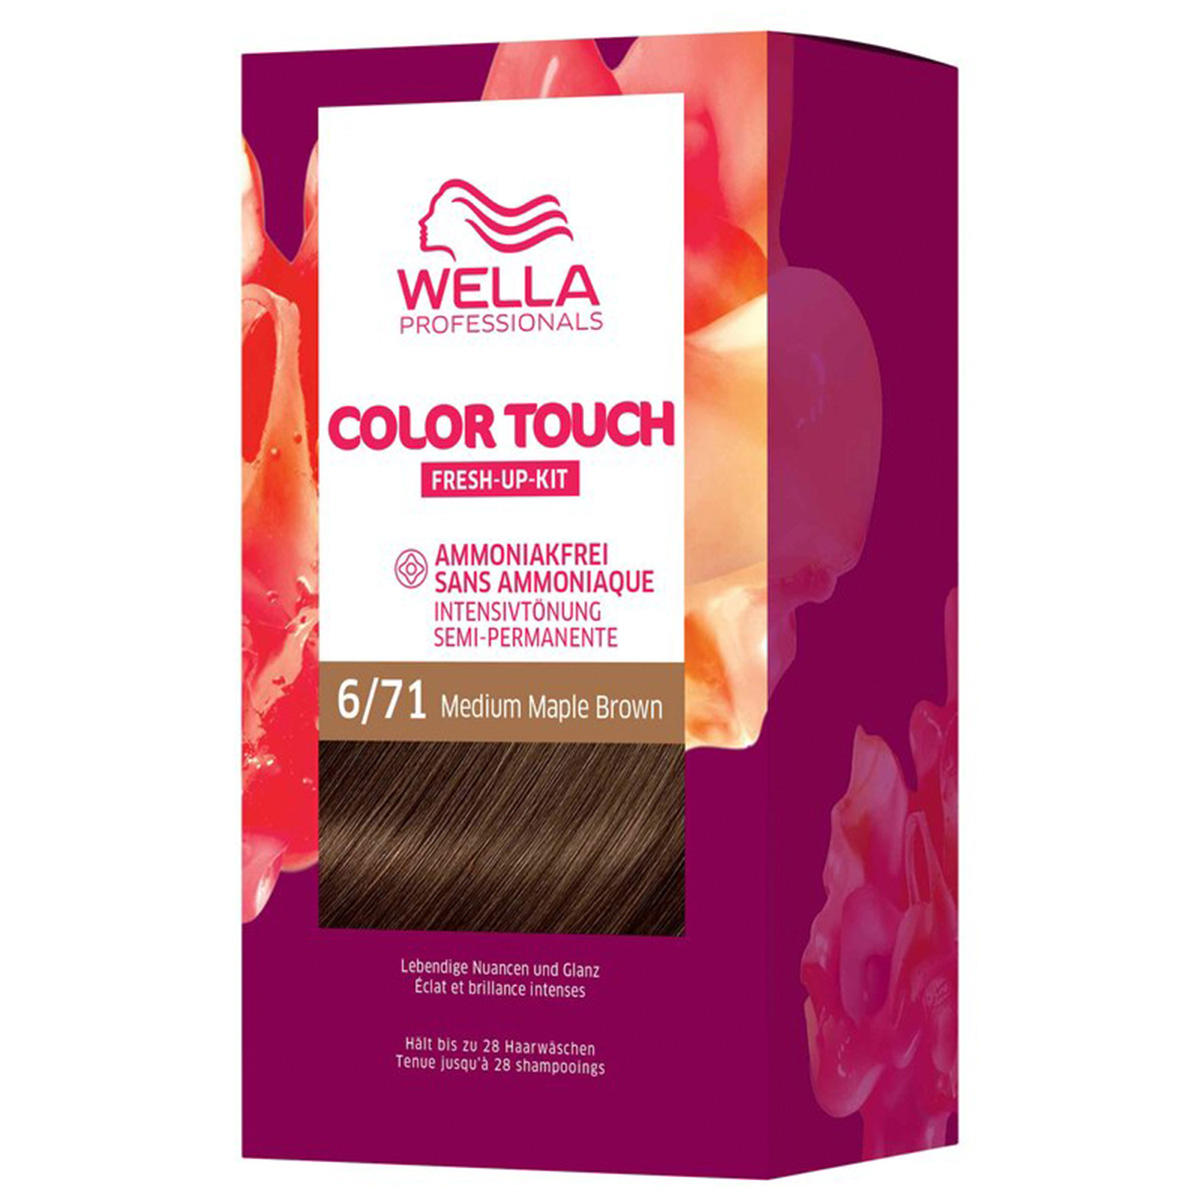 Wella Color Touch Fresh-Up-Kit 6/71 Donkerblond bruin-wit 130 ml - 1